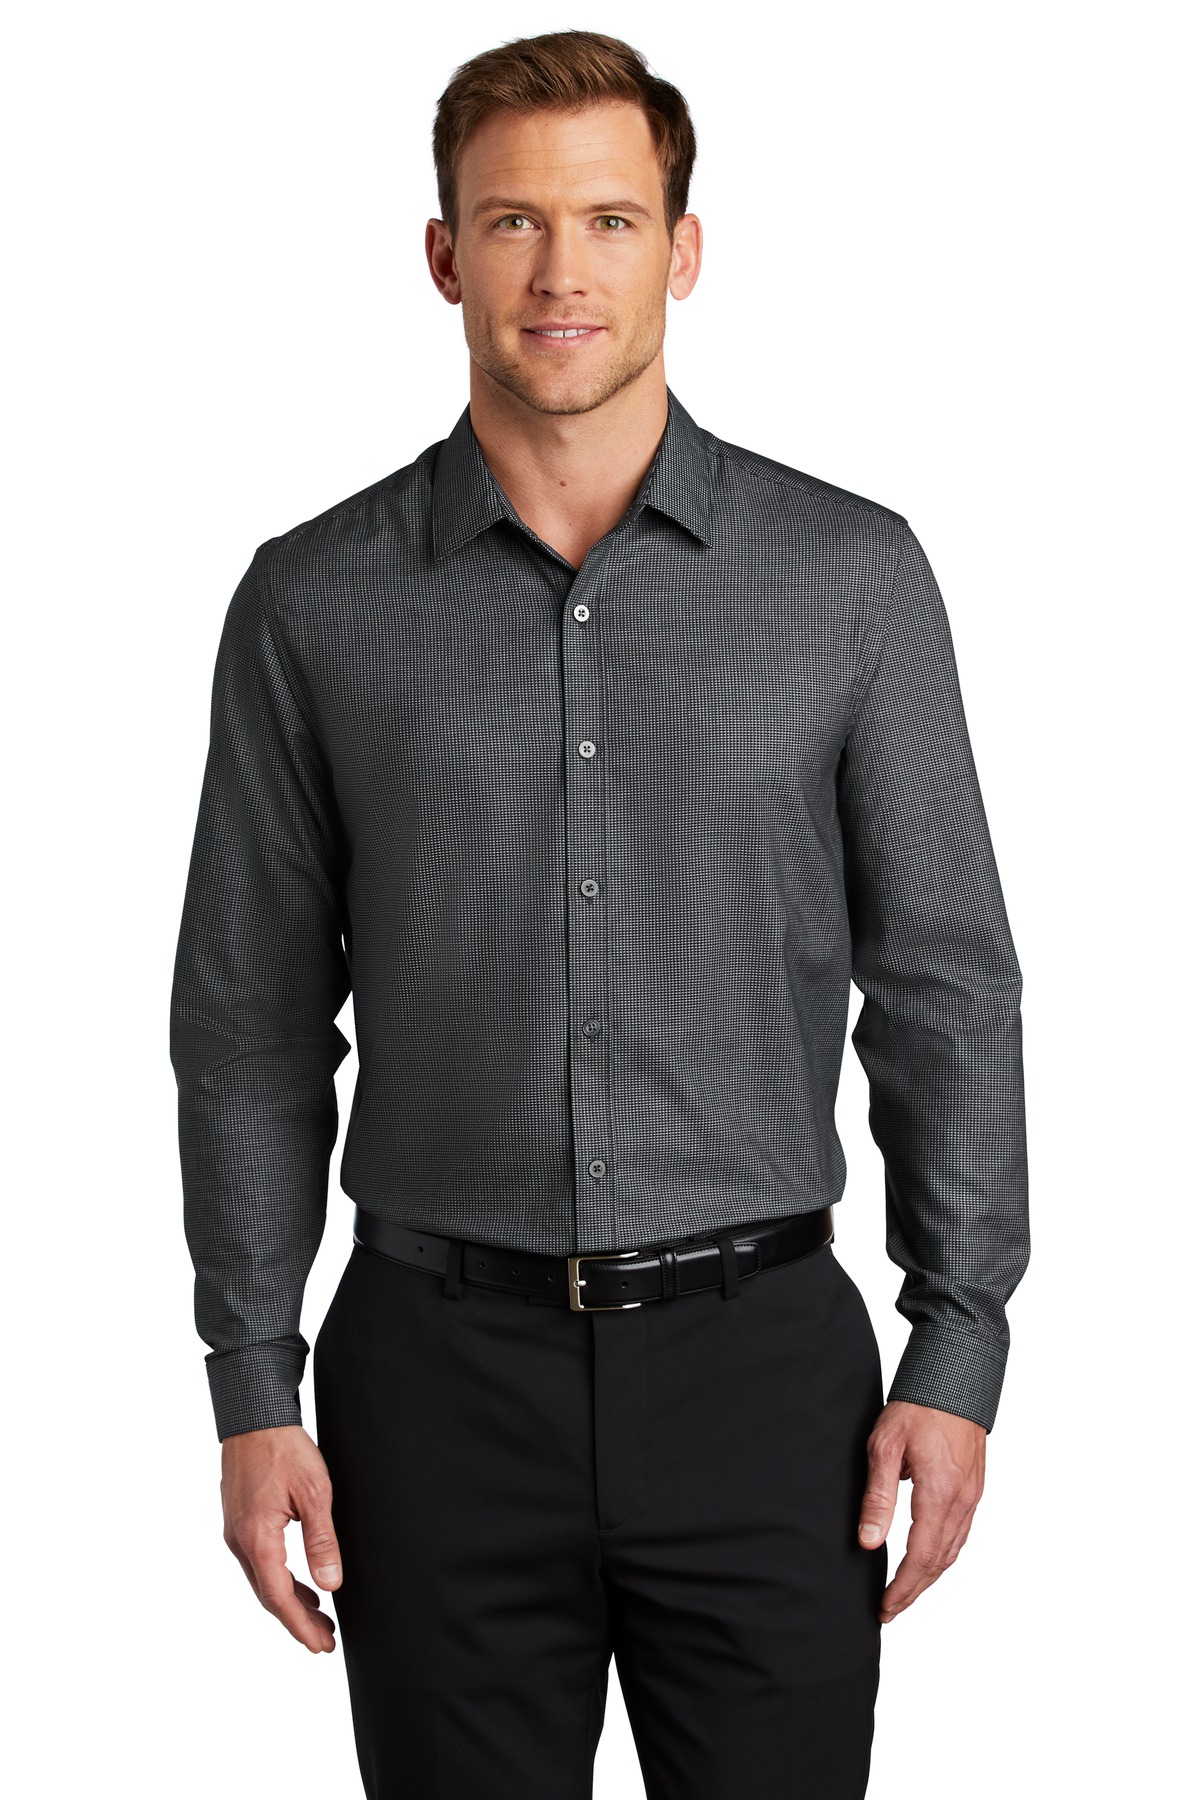 Port Authority Woven Shirts for Hospitality ® Pincheck Easy Care Shirt-Port Authority